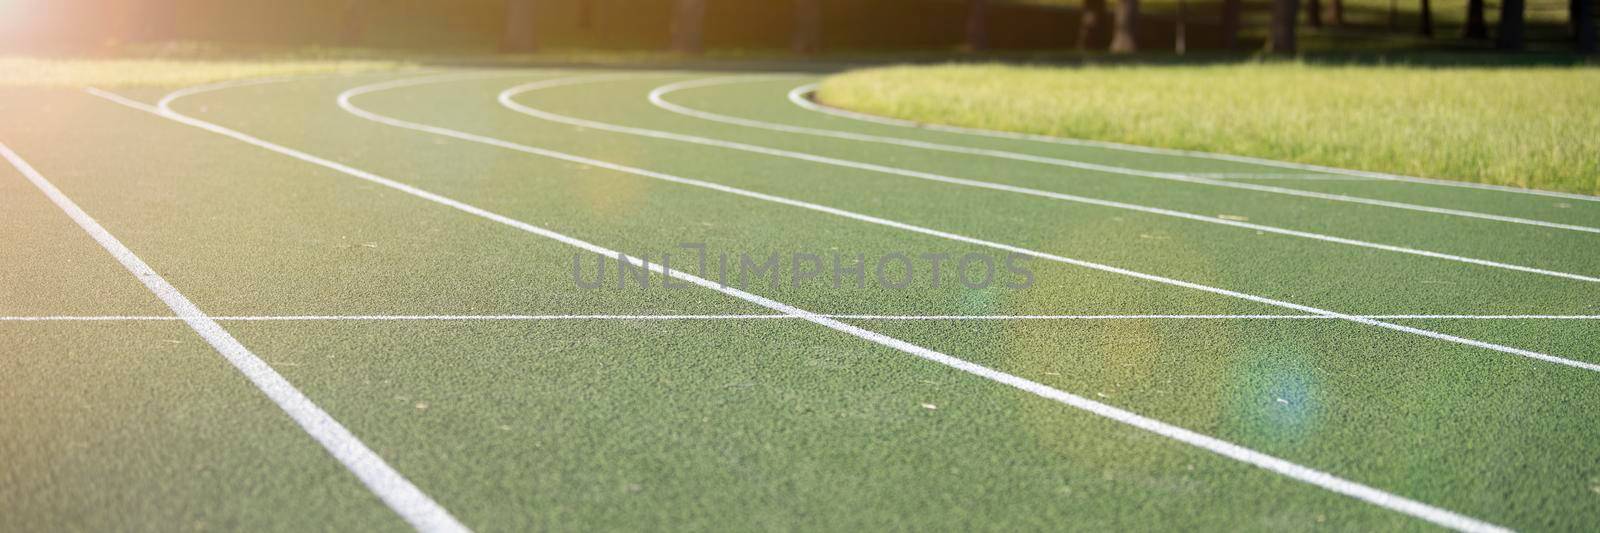 Running track at the stadium. Rubber coated green. Running track in the park outdoors, summer by SERSOL